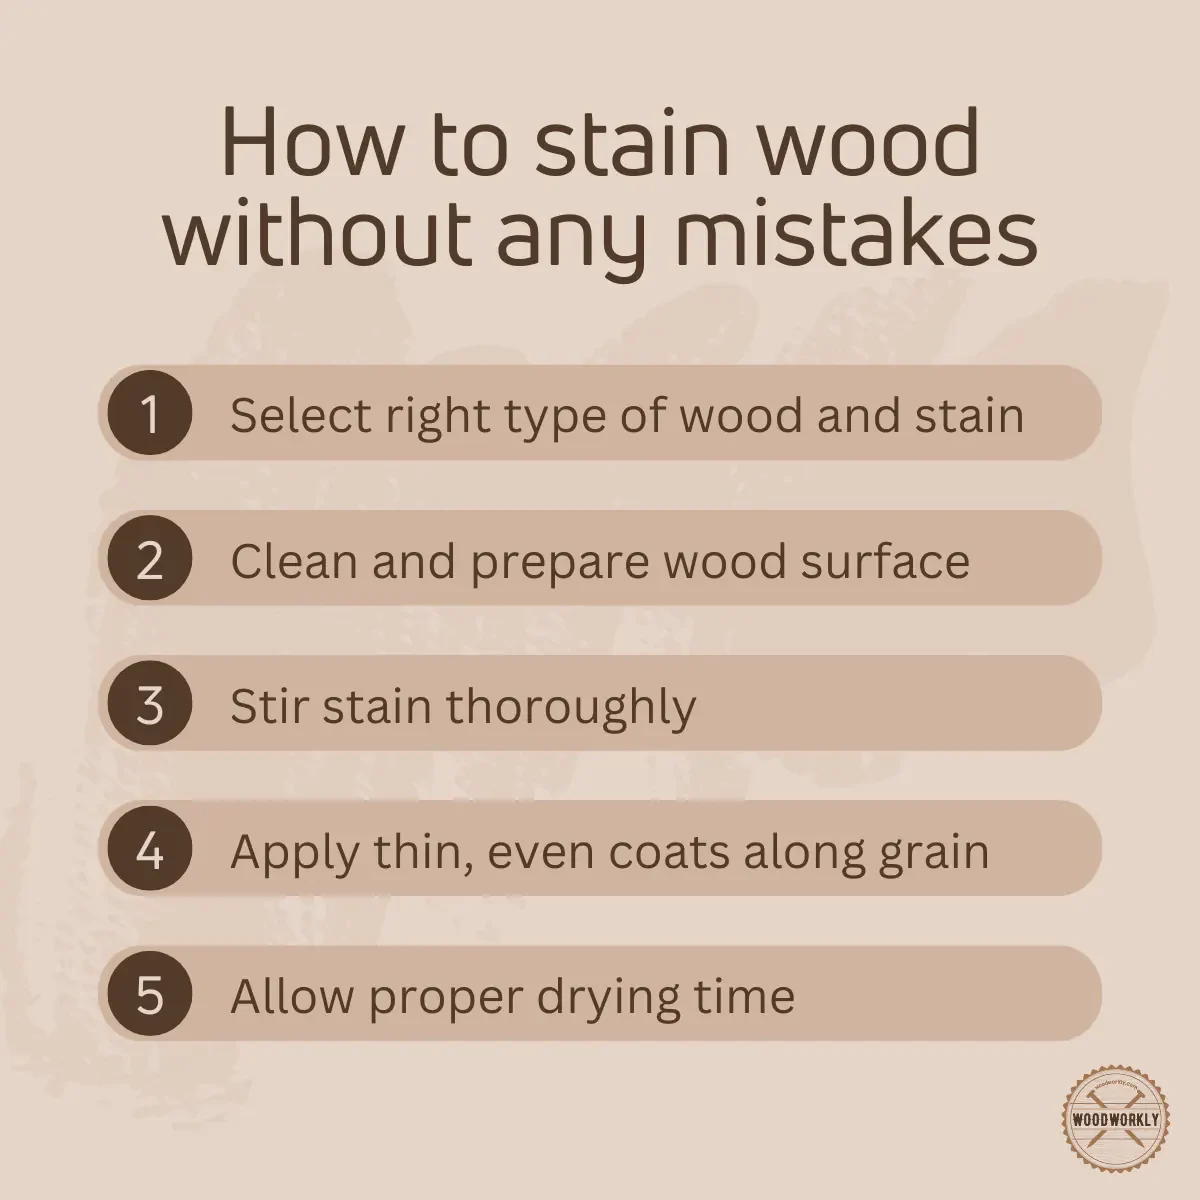 How to stain wood without any mistakes